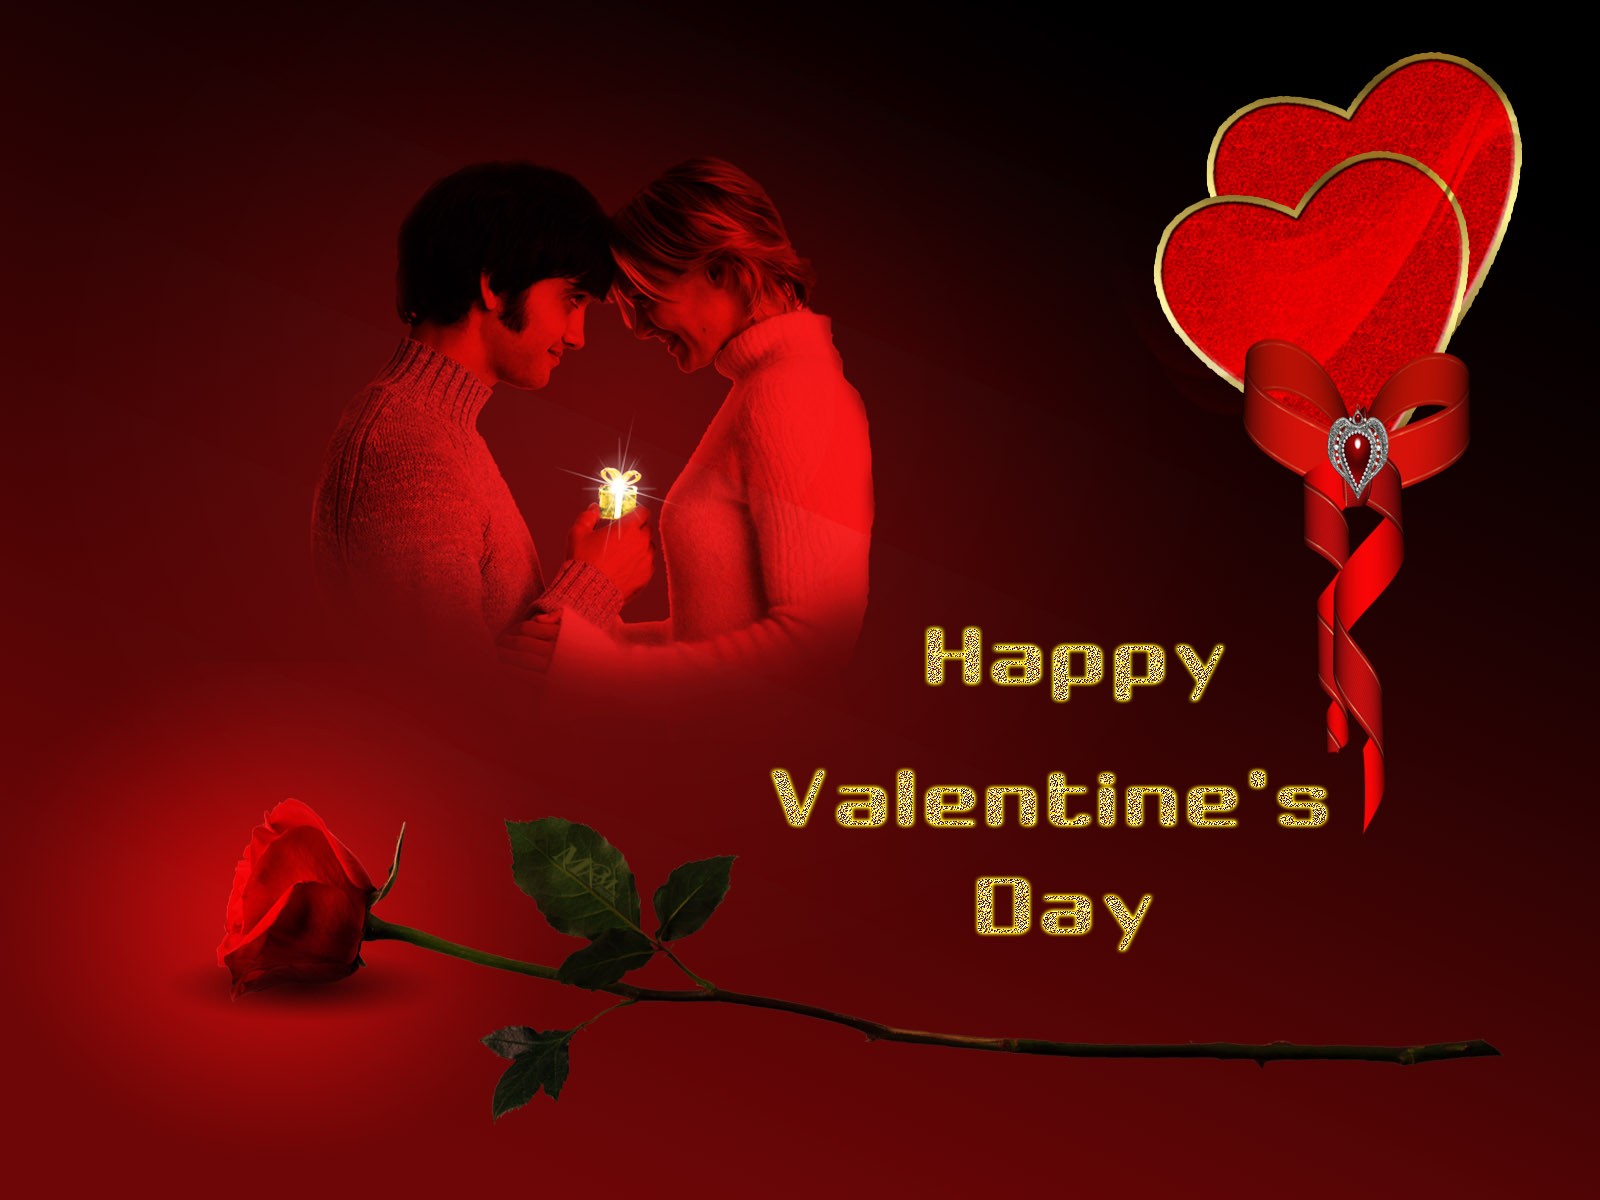 Valentine's Day Images & HD Wallpapers for Free Download Online: Wish Happy  Valentine's Day With WhatsApp Messages, Quotes and GIF Greetings